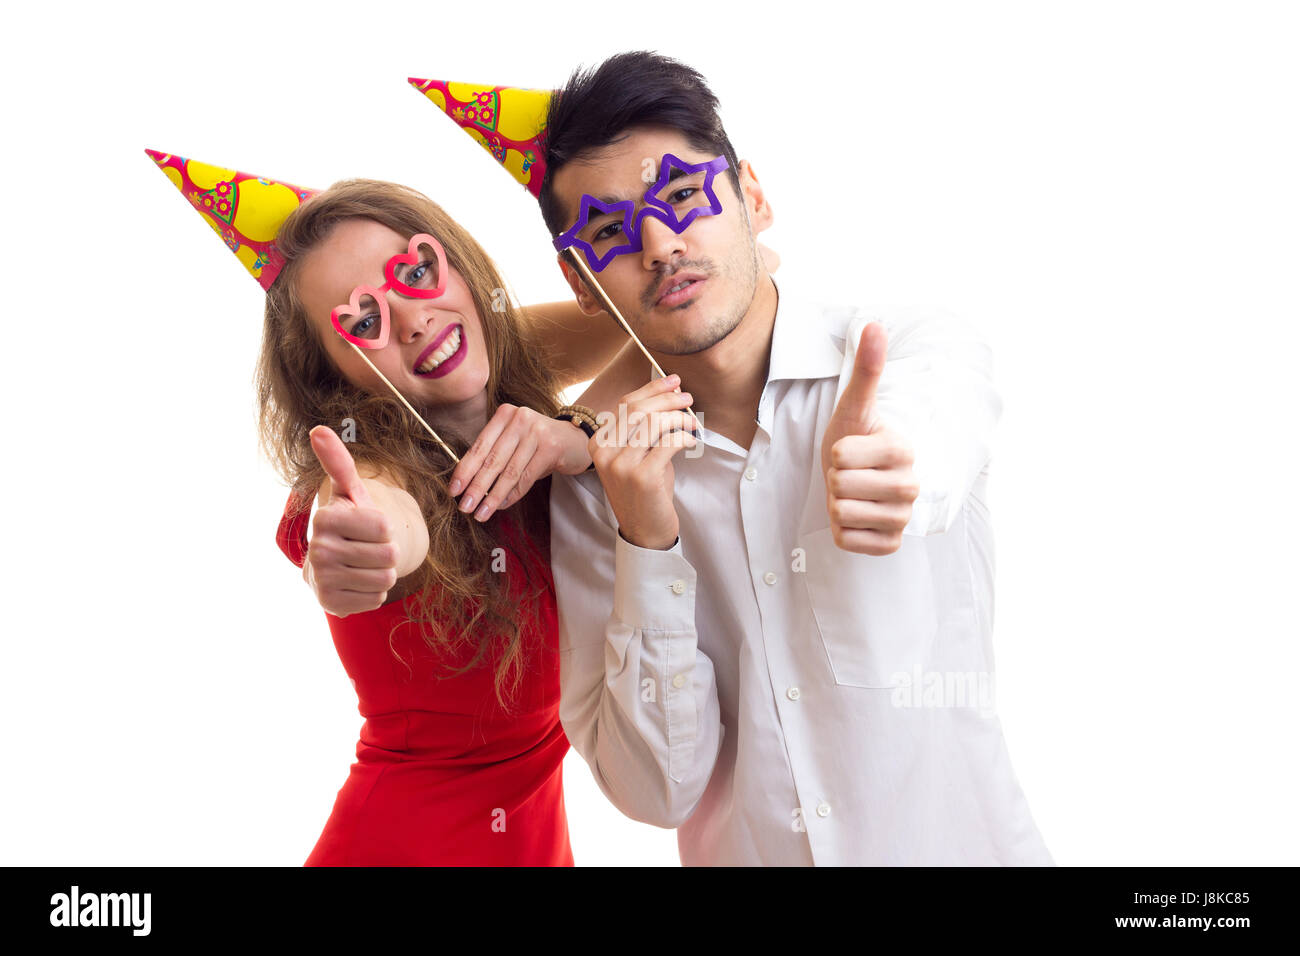 Young couple with card sticks and celebrating hats Stock Photo